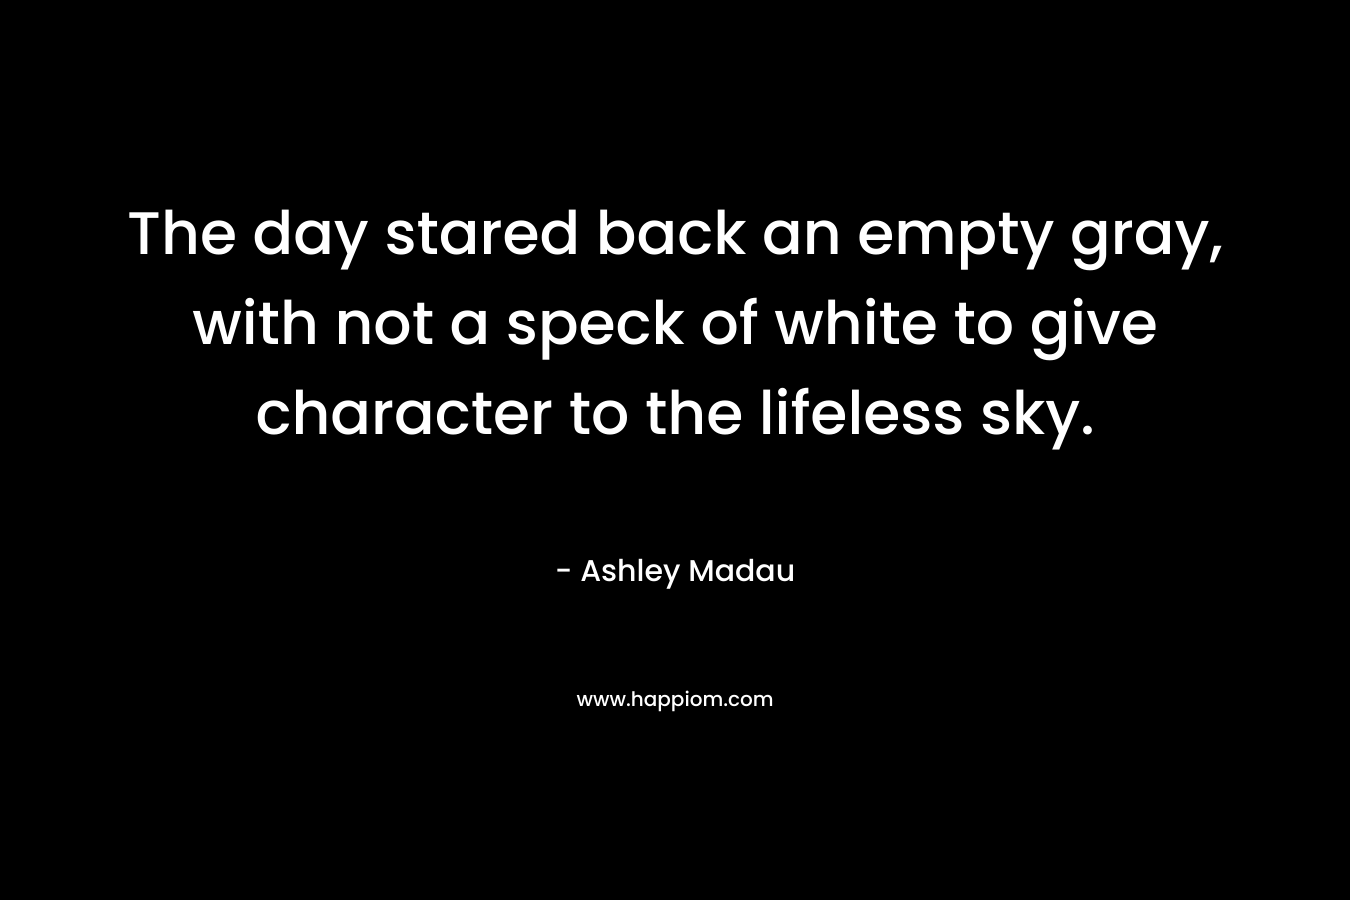 The day stared back an empty gray, with not a speck of white to give character to the lifeless sky. – Ashley Madau